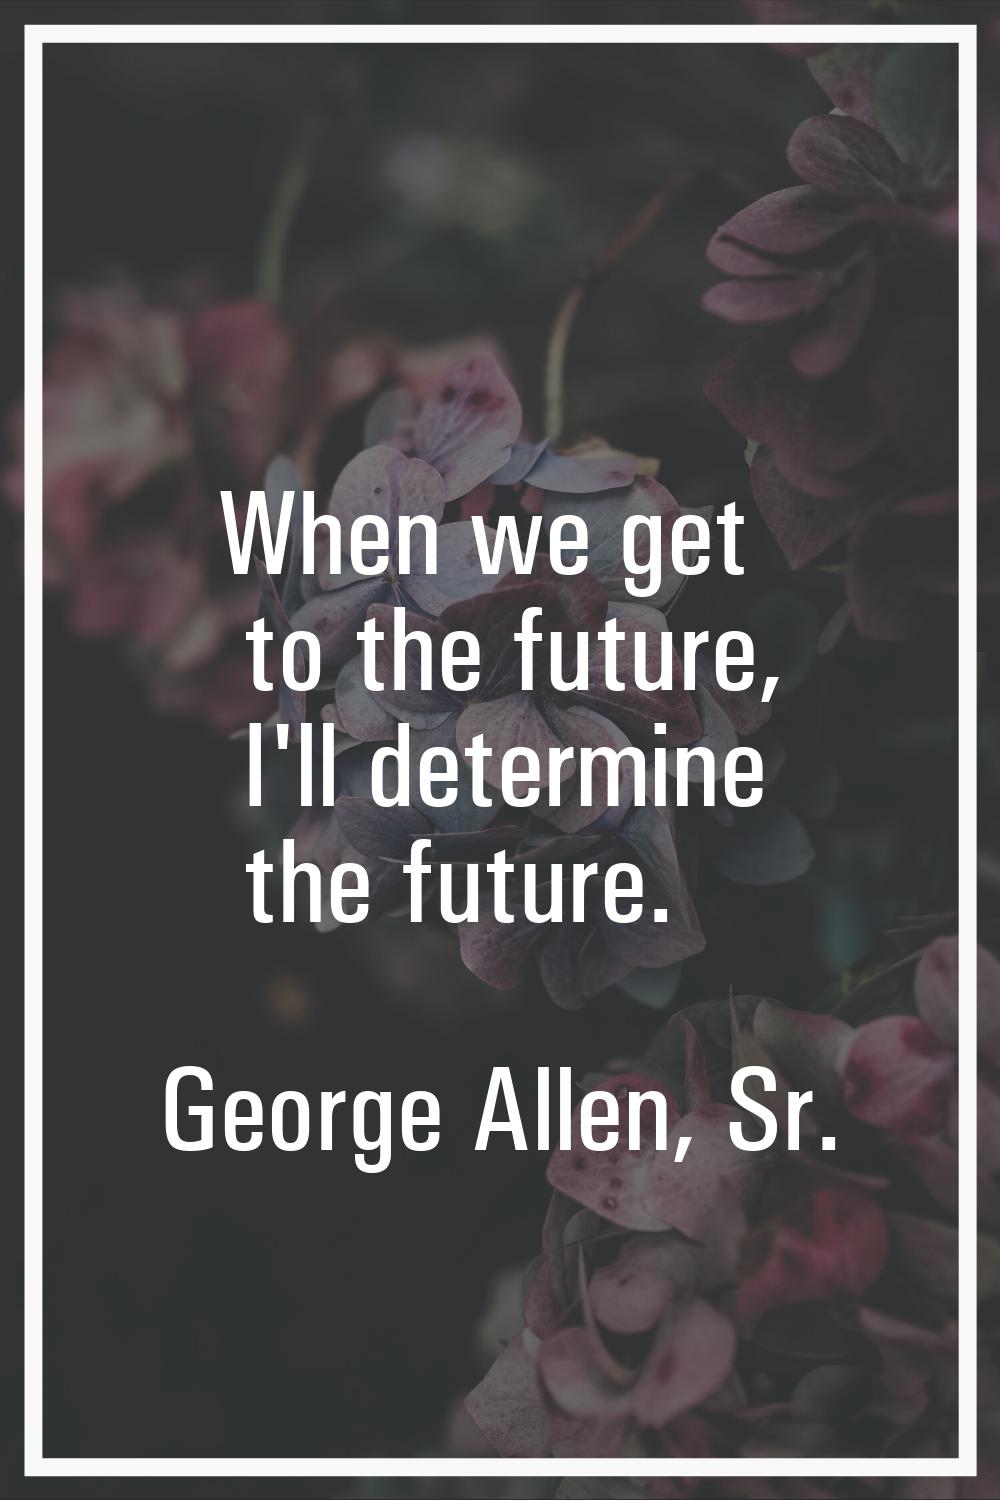 When we get to the future, I'll determine the future.